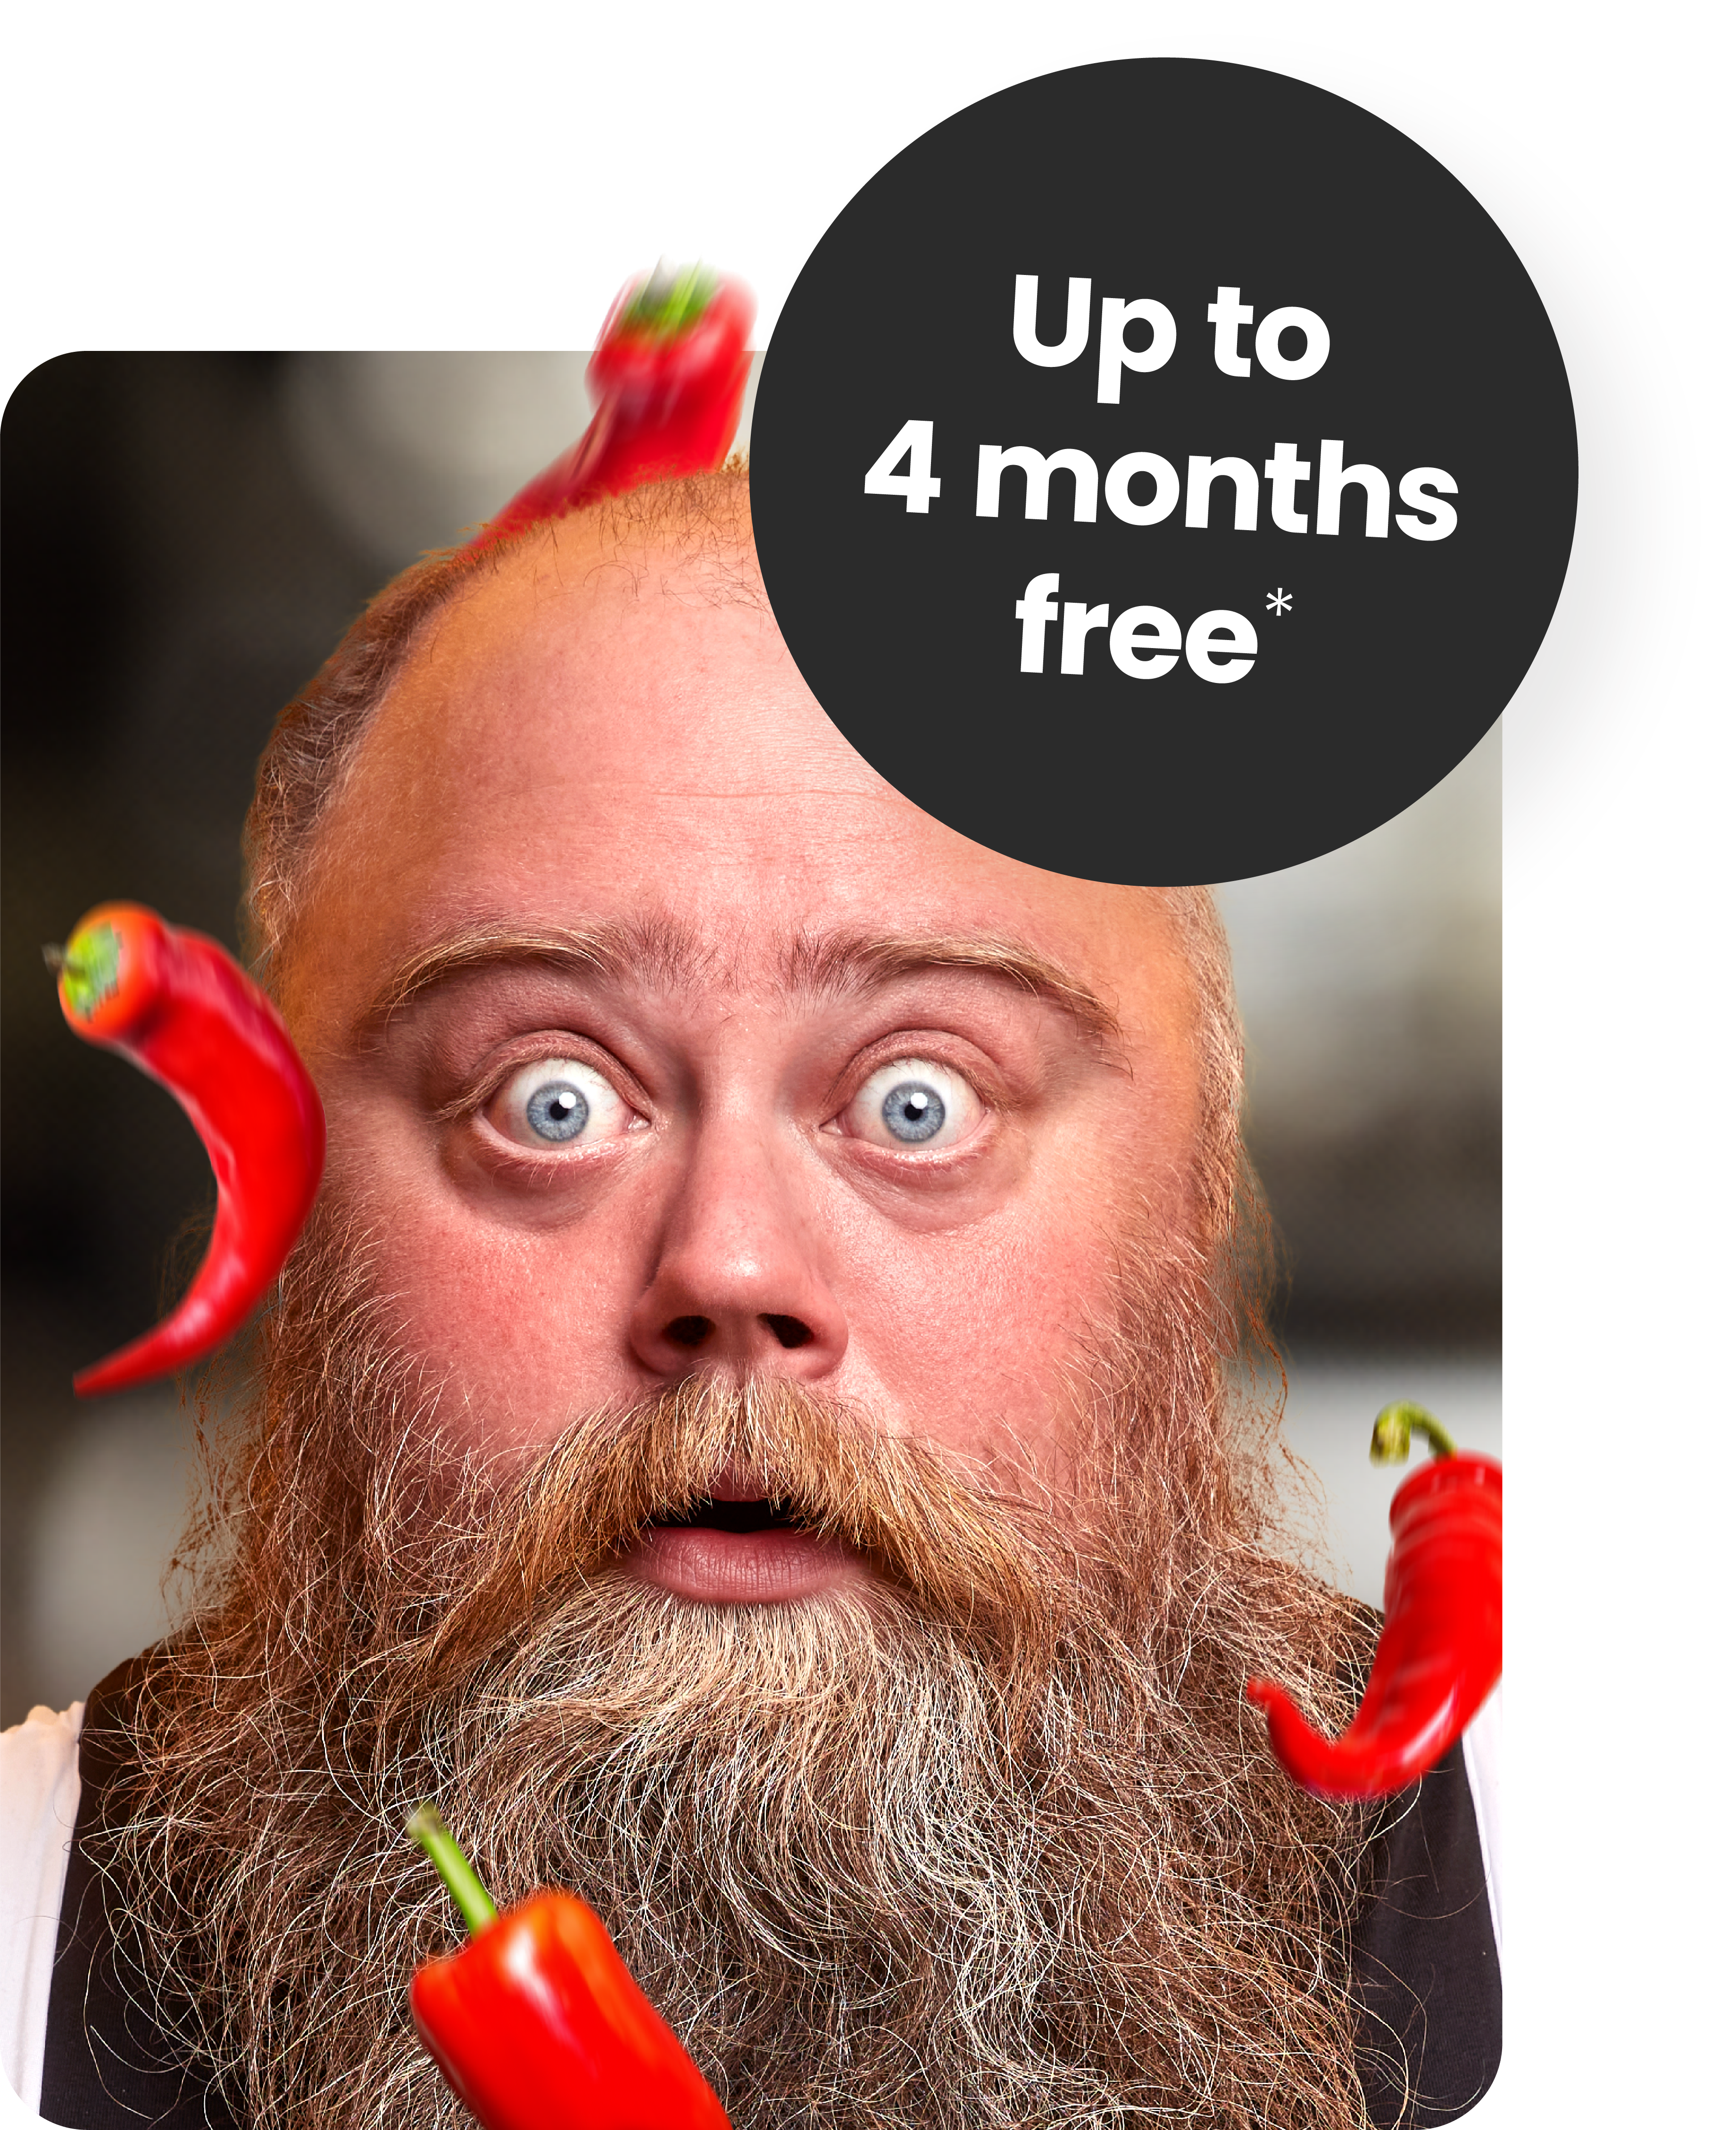 Up to 4 months free broadband with Connexin